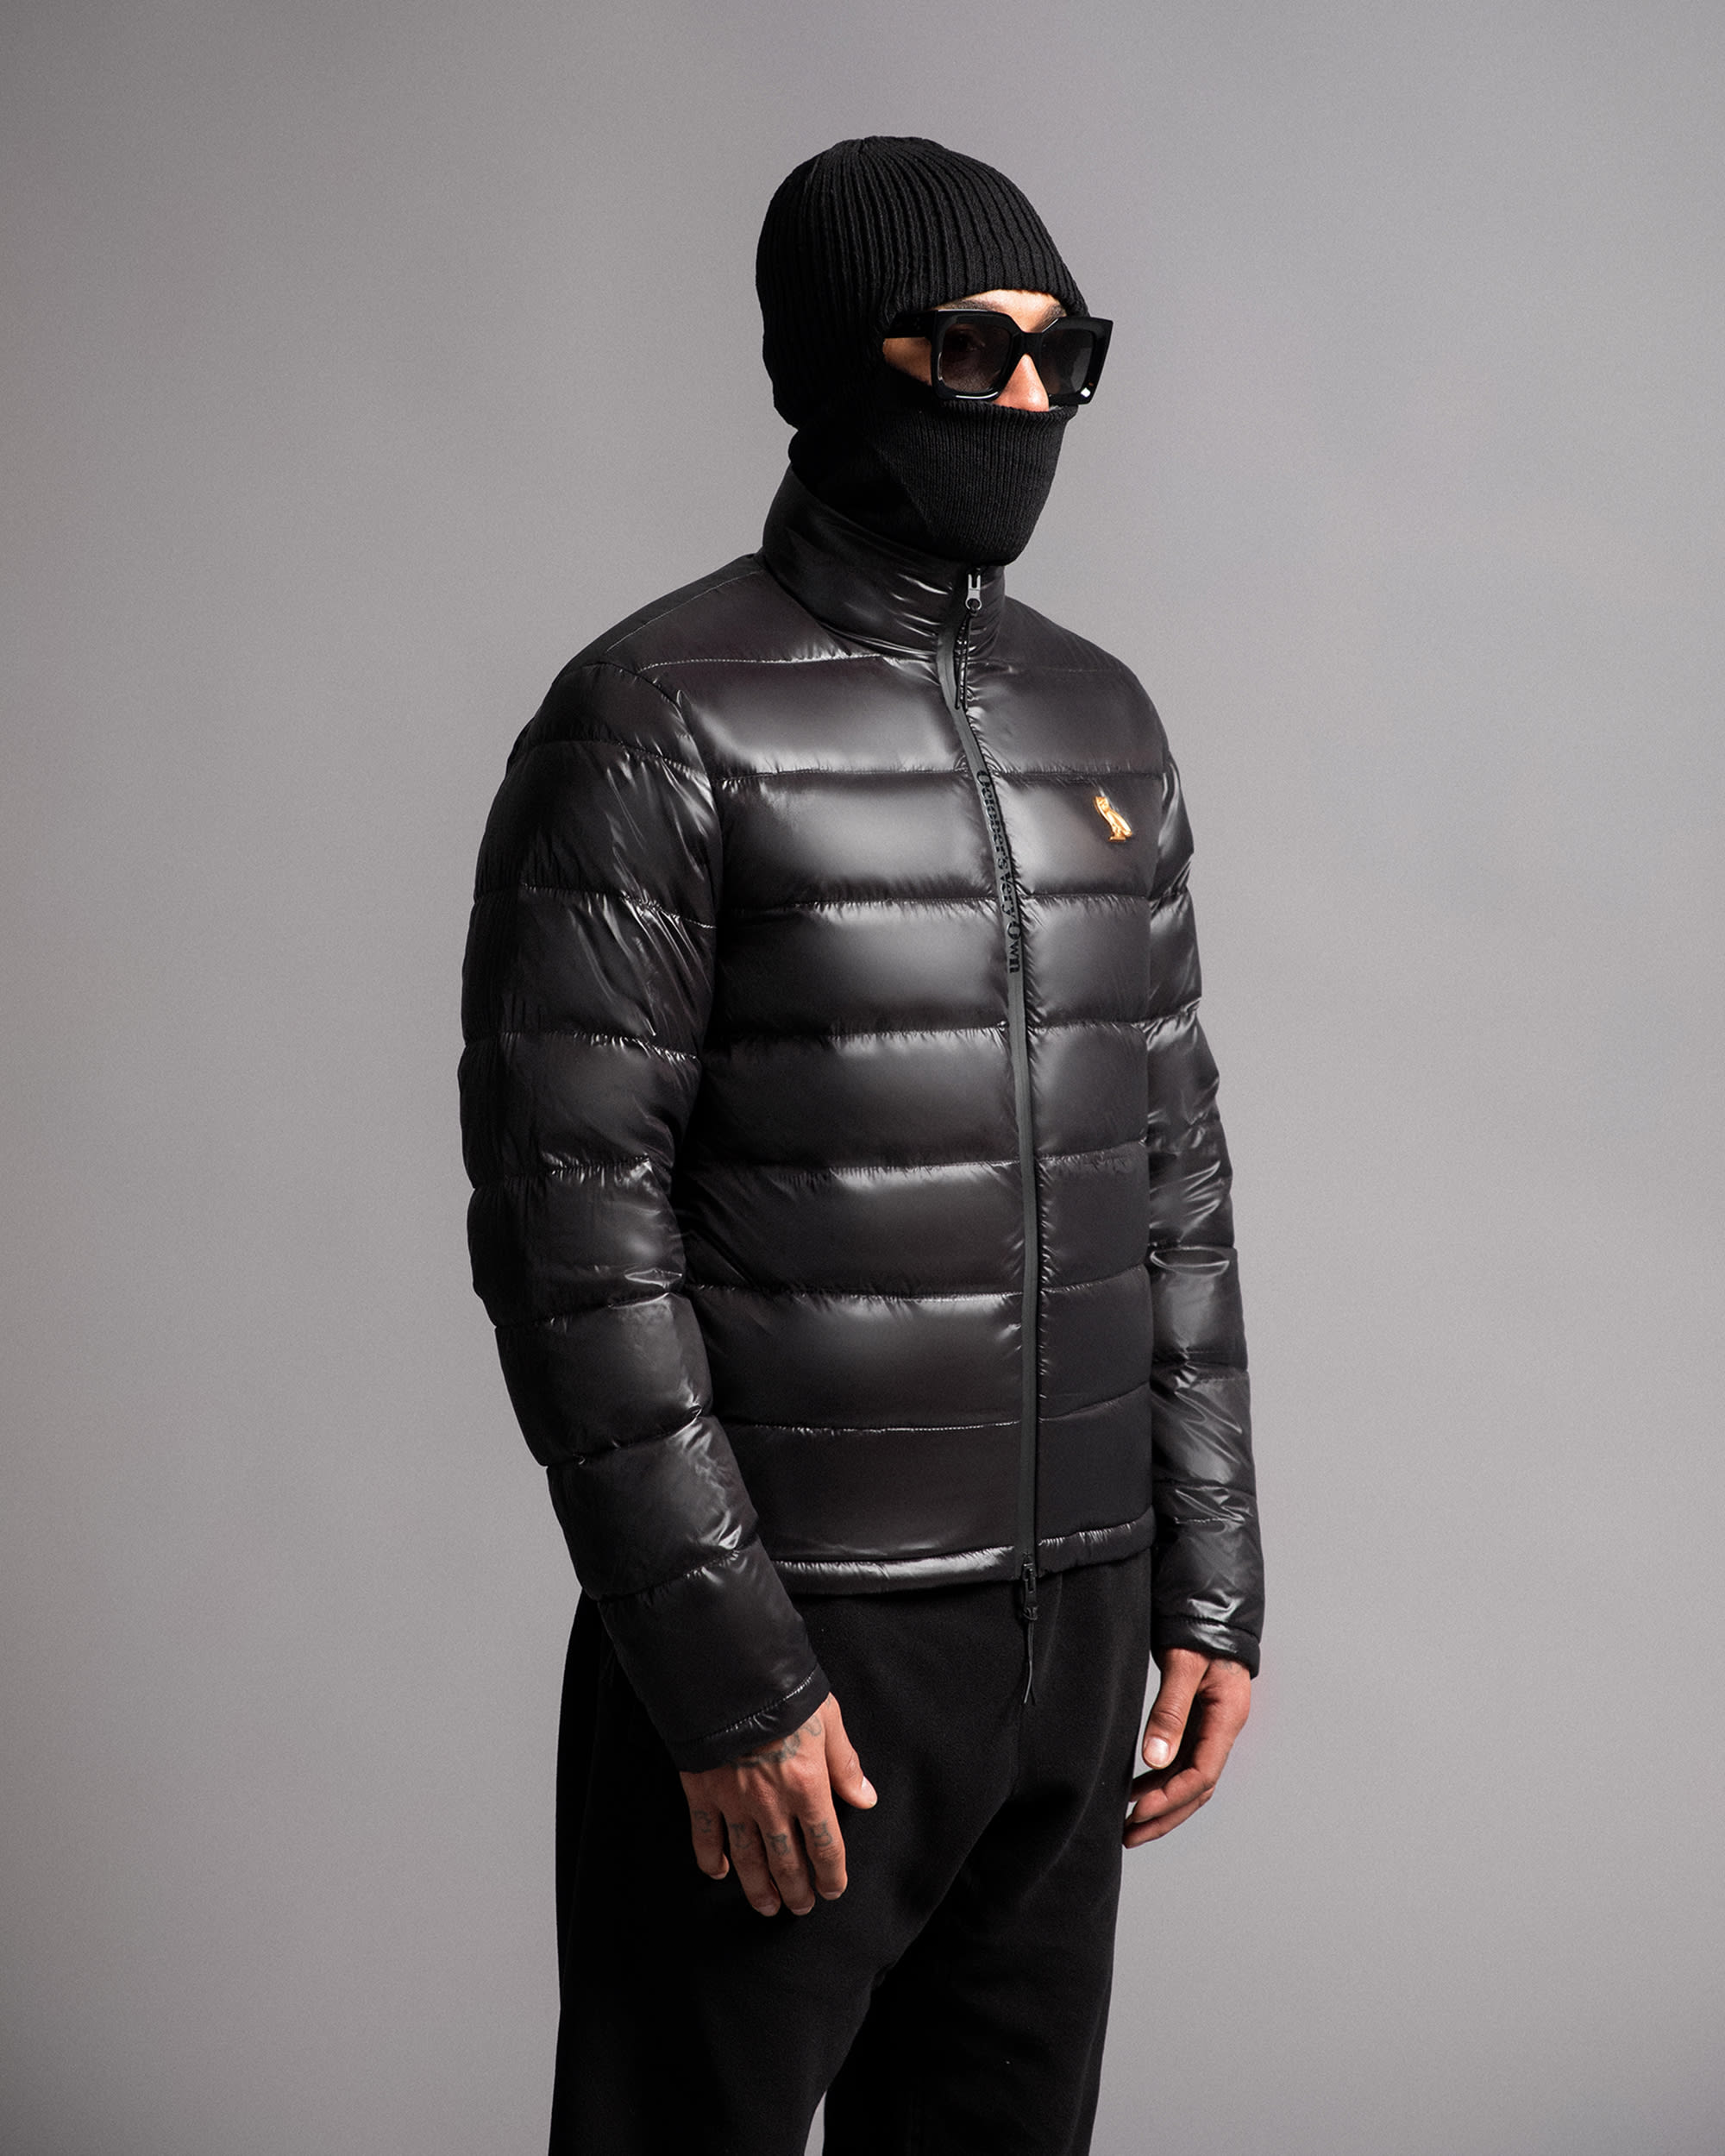 Model in black puffer and sunglasses